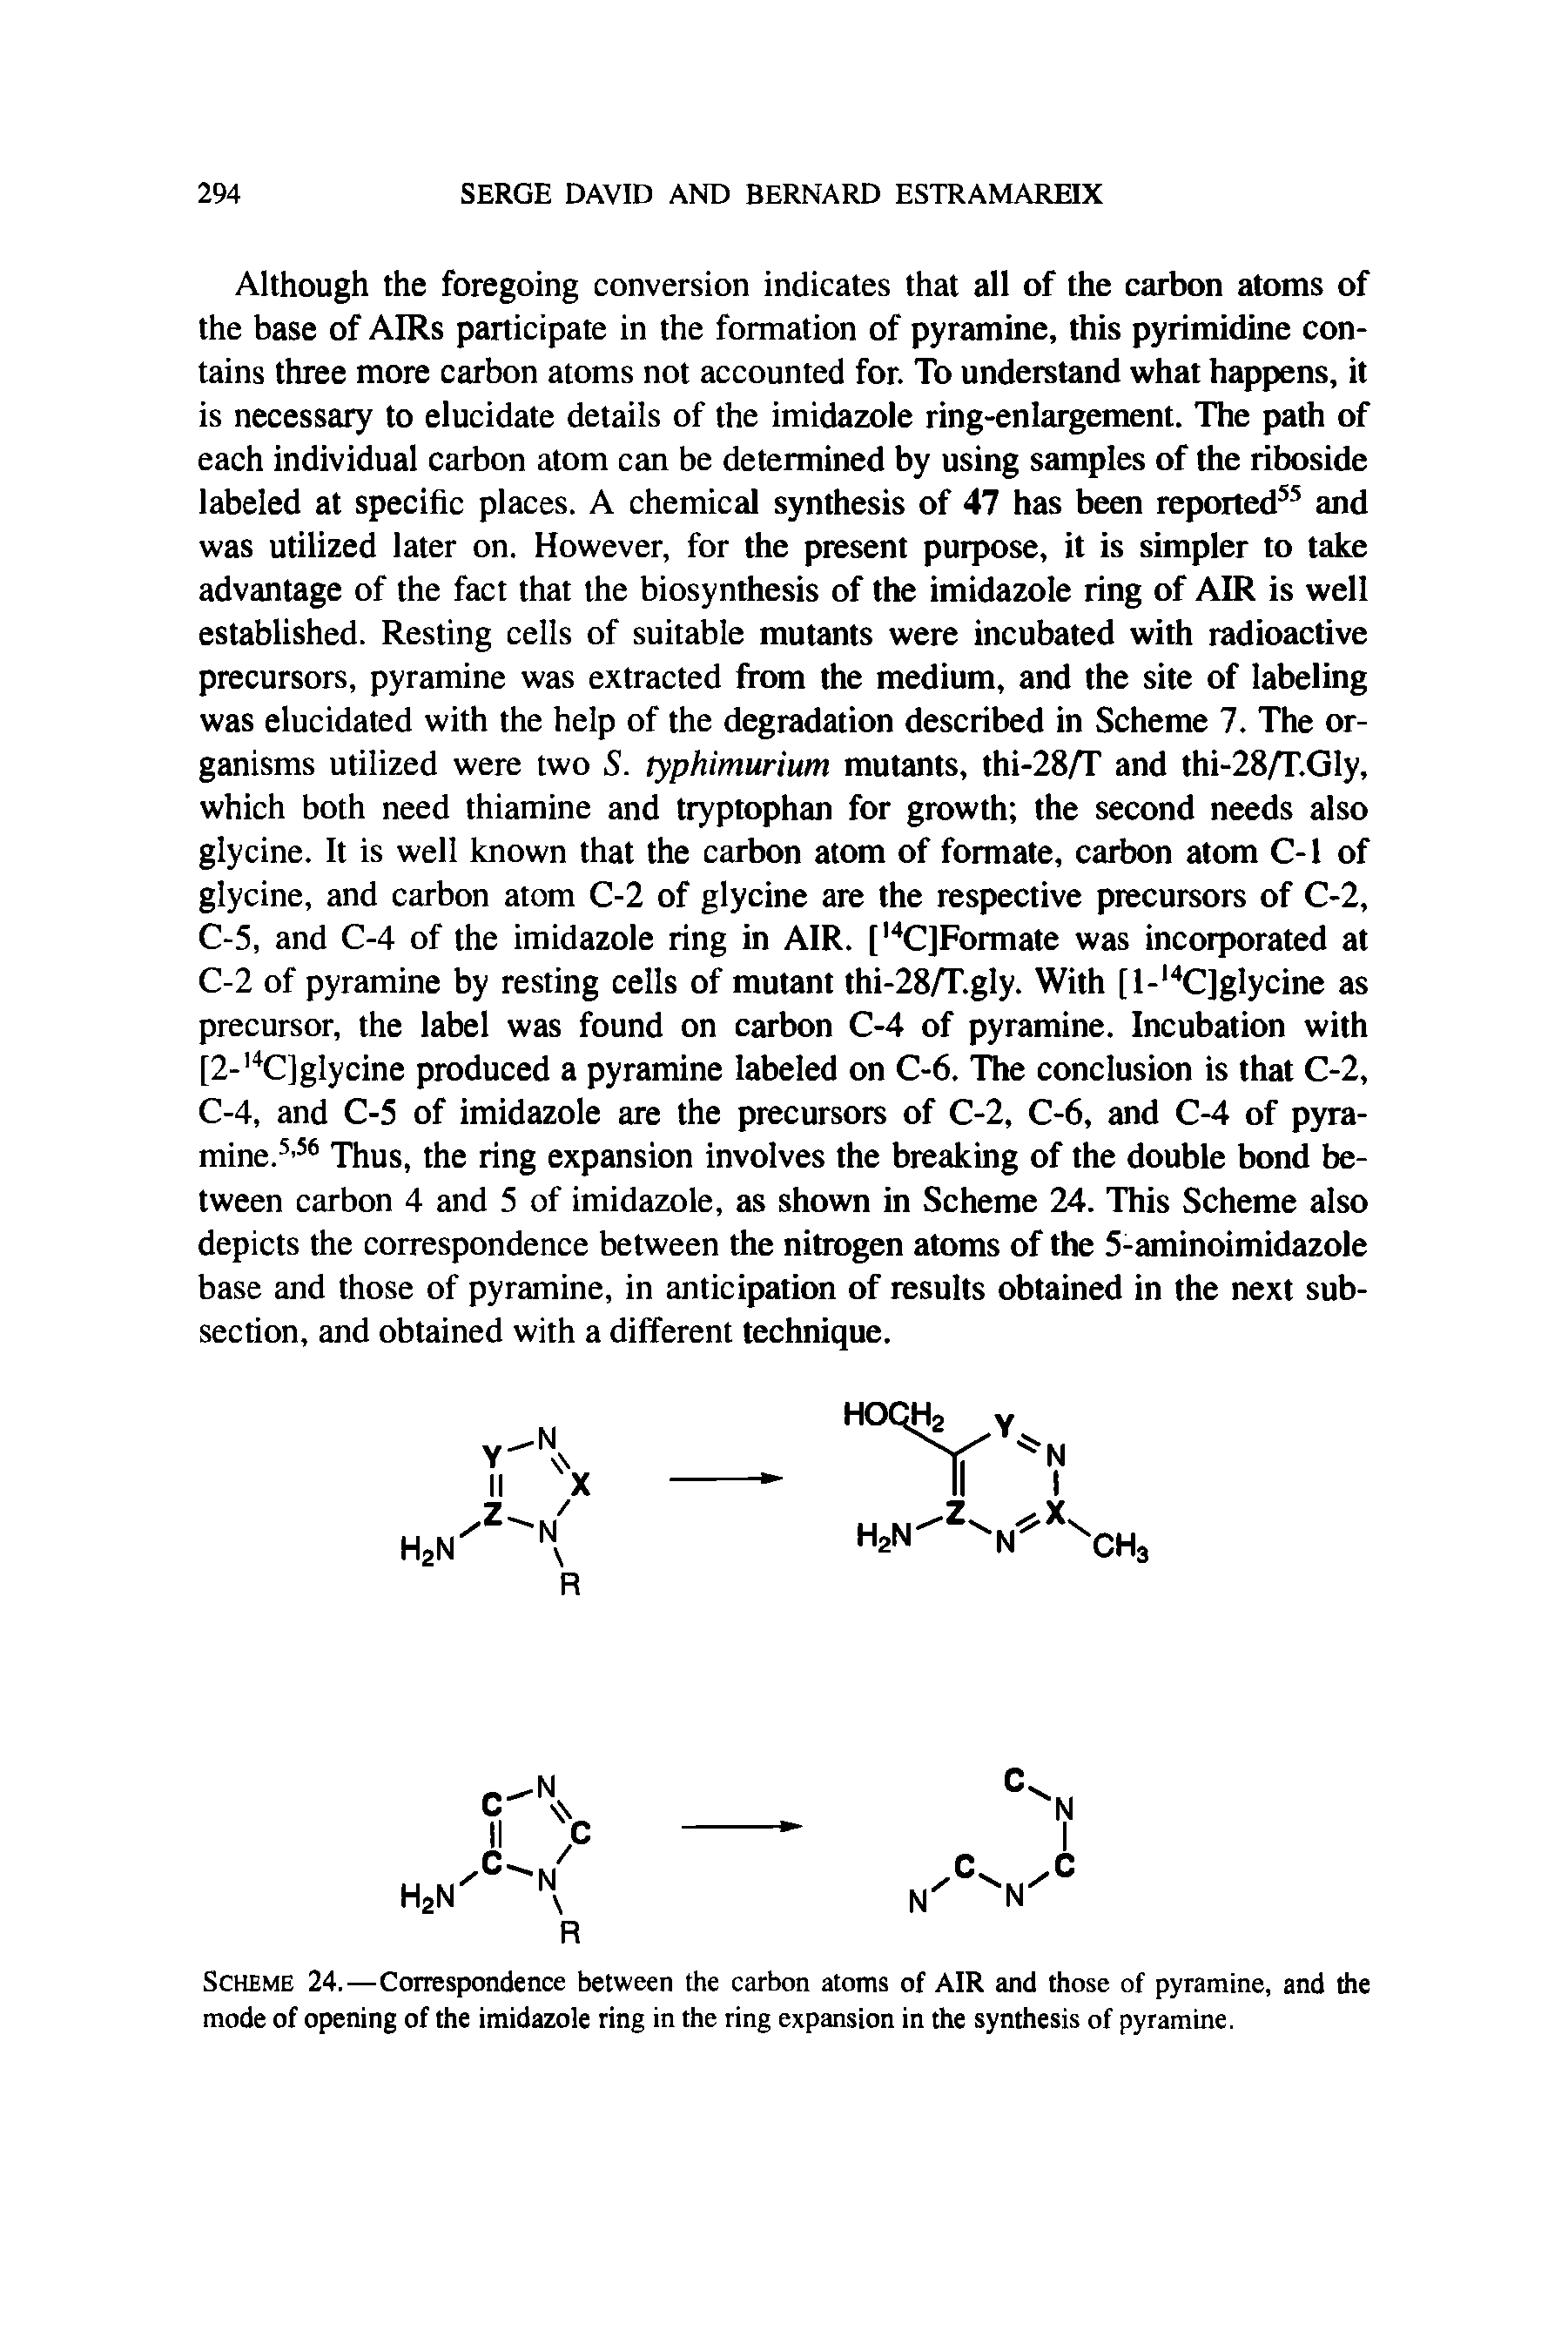 Scheme 24.—Correspondence between the carbon atoms of AIR and those of pyramine, and the mode of opening of the imidazole ring in the ring expansion in the synthesis of pyramine.